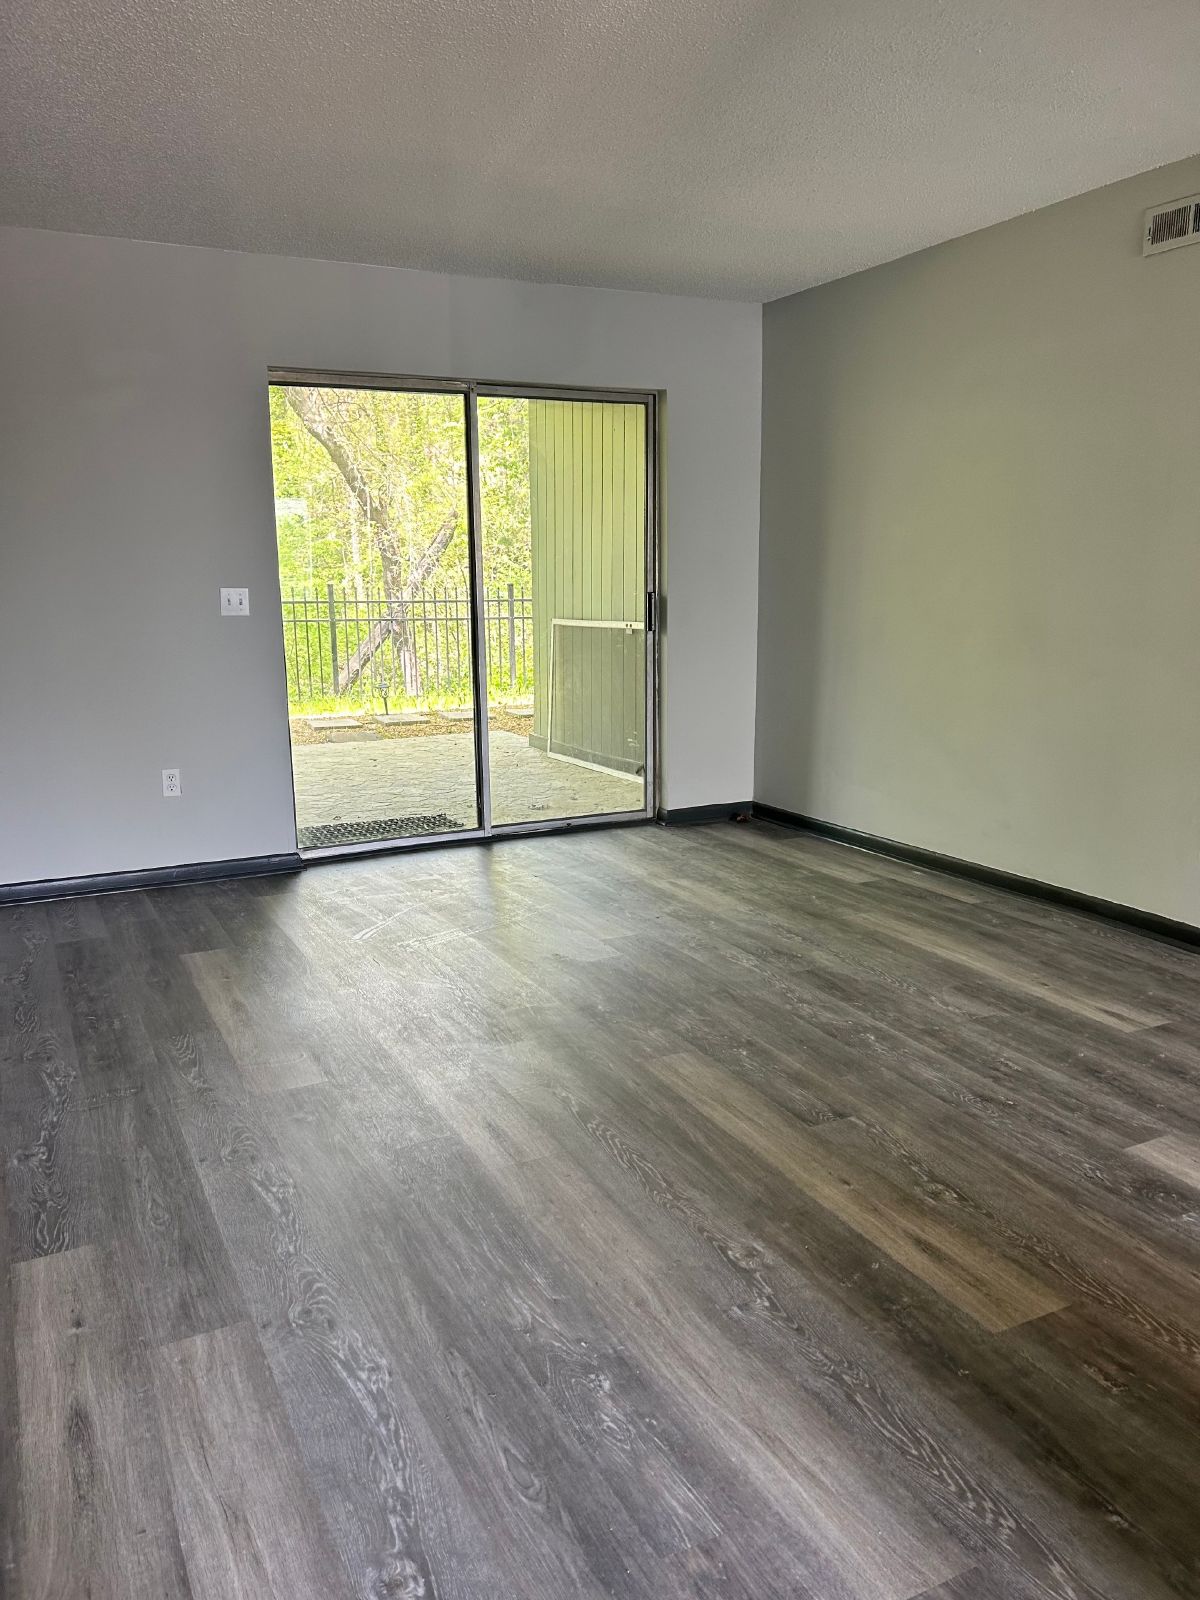 Fully Renovated 2 Bed, 1 Bath, End Unit, Nestled in East Ridge! property image